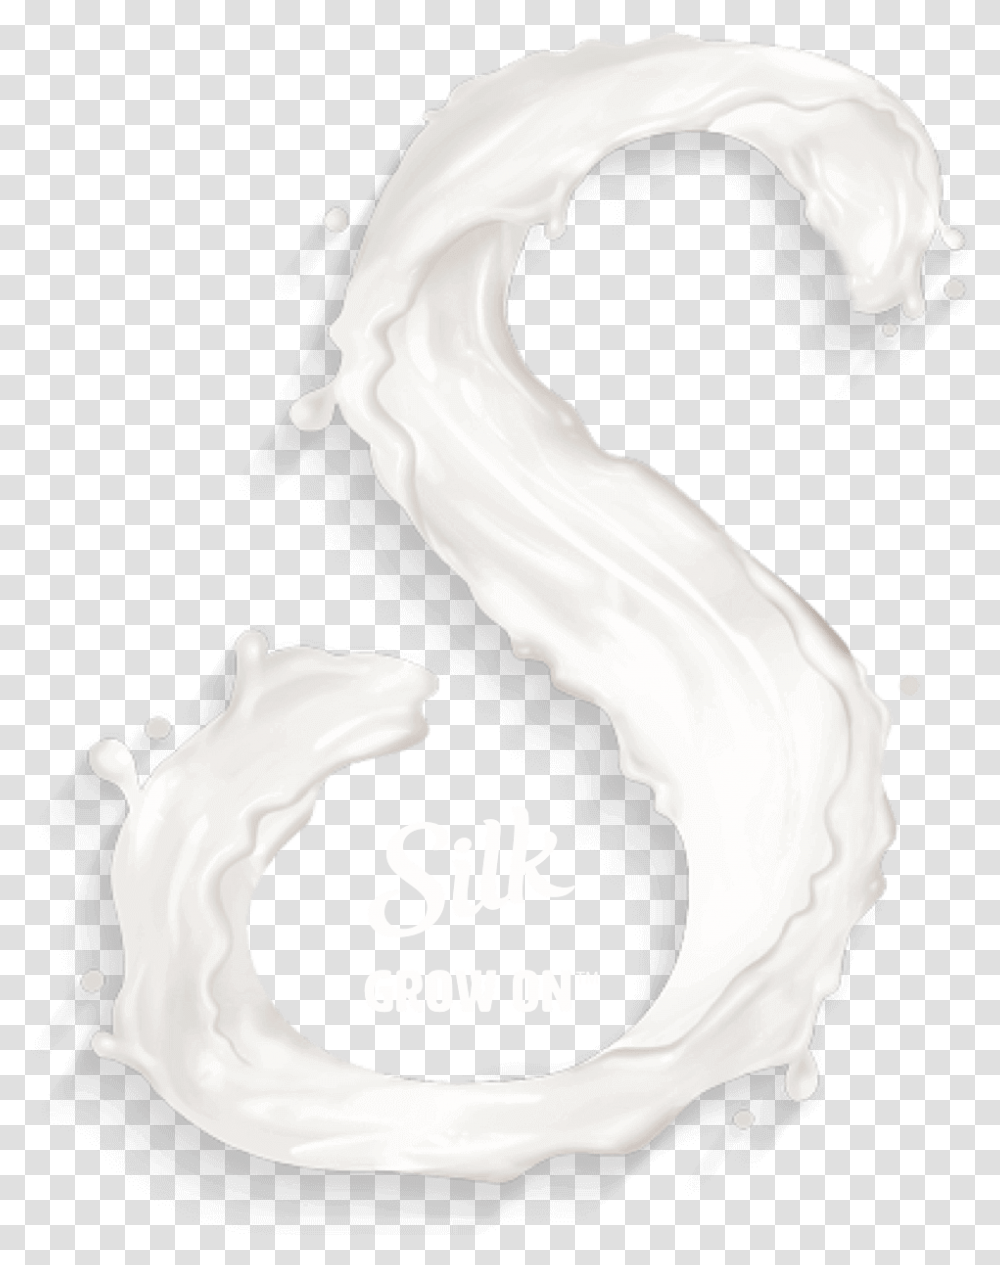 Silk Whipped Cream, Label, Beverage, Drink Transparent Png